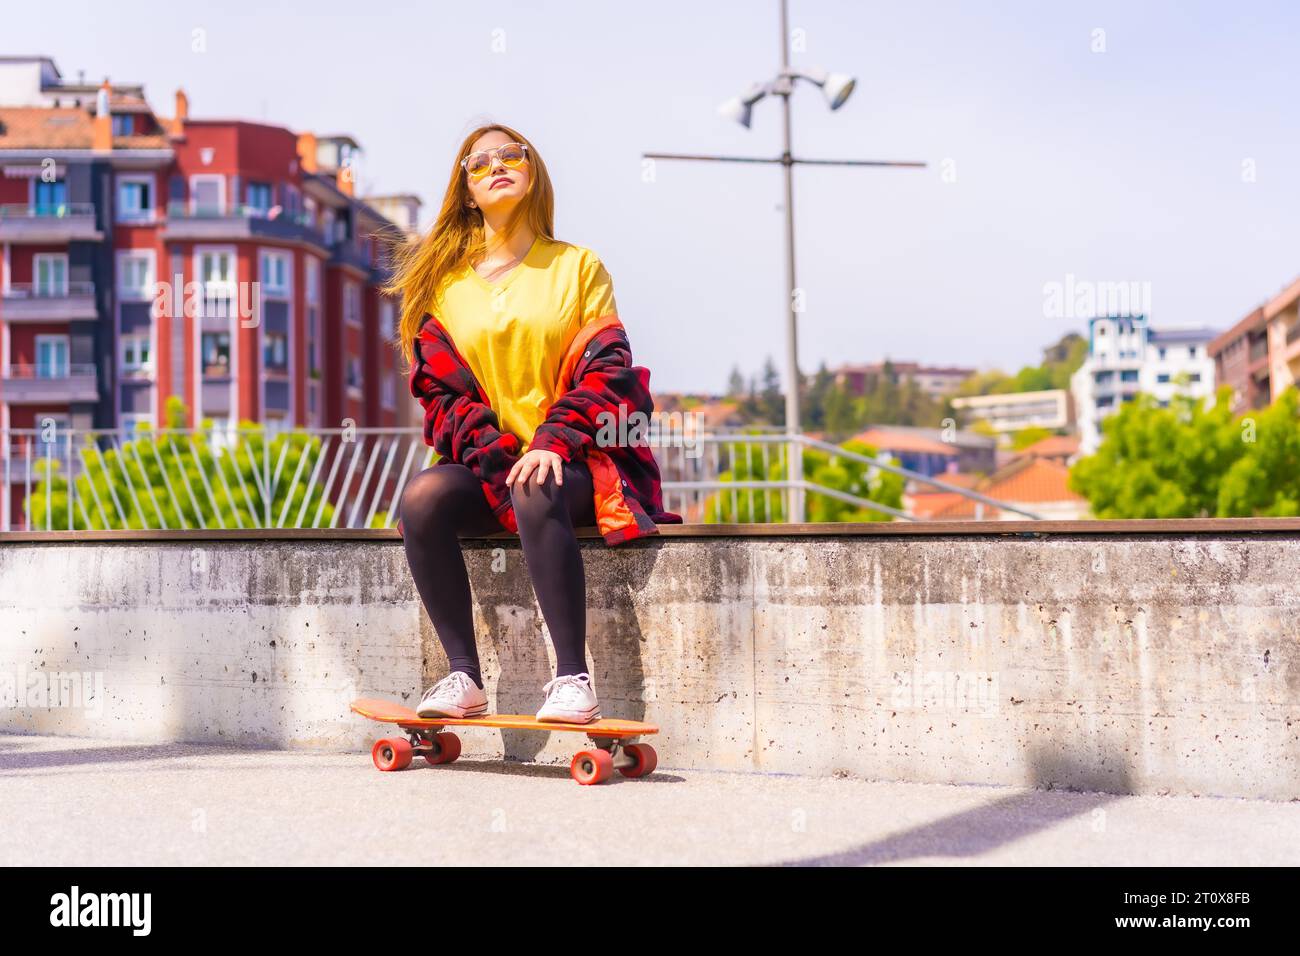 Skater woman in a yellow t-shirt, red plaid shirt and sunglasses, sitting with skateboard on a bench in the city Stock Photo